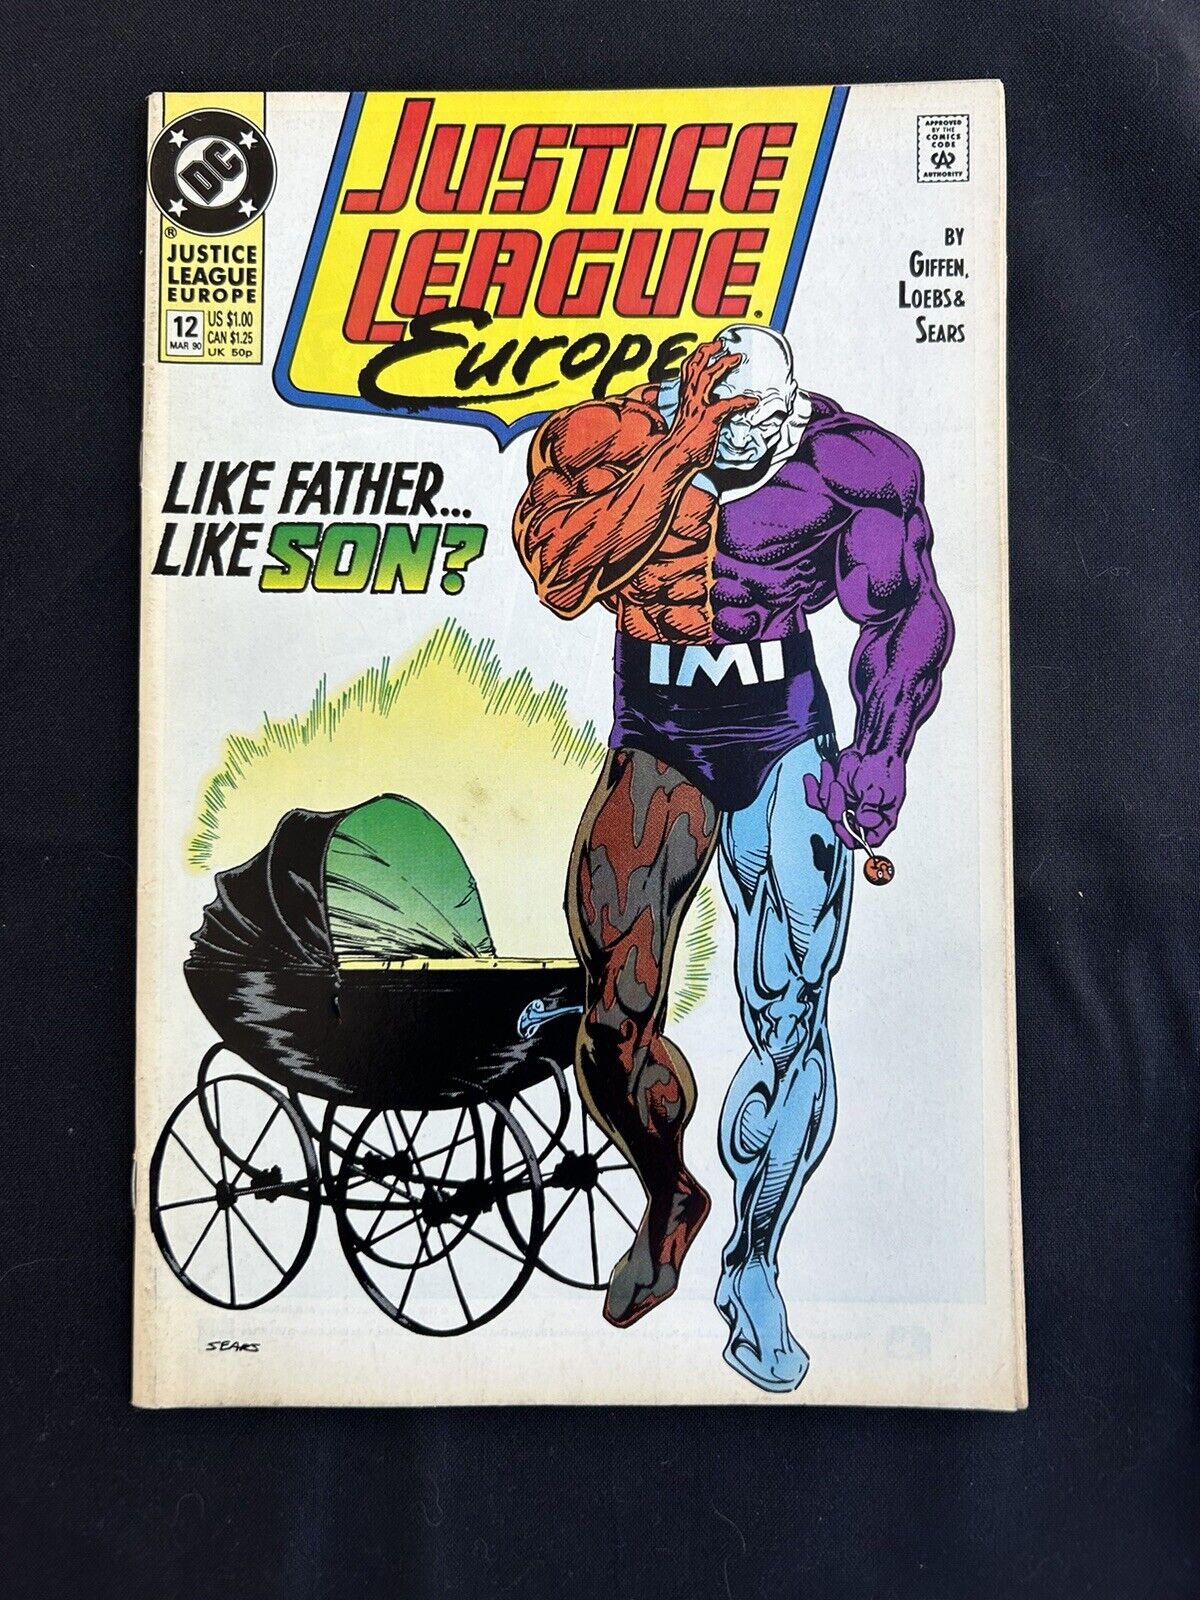 JUSTICE LEAGUE EUROPE #12 Ungraded DC COMIC BOOK March 1990